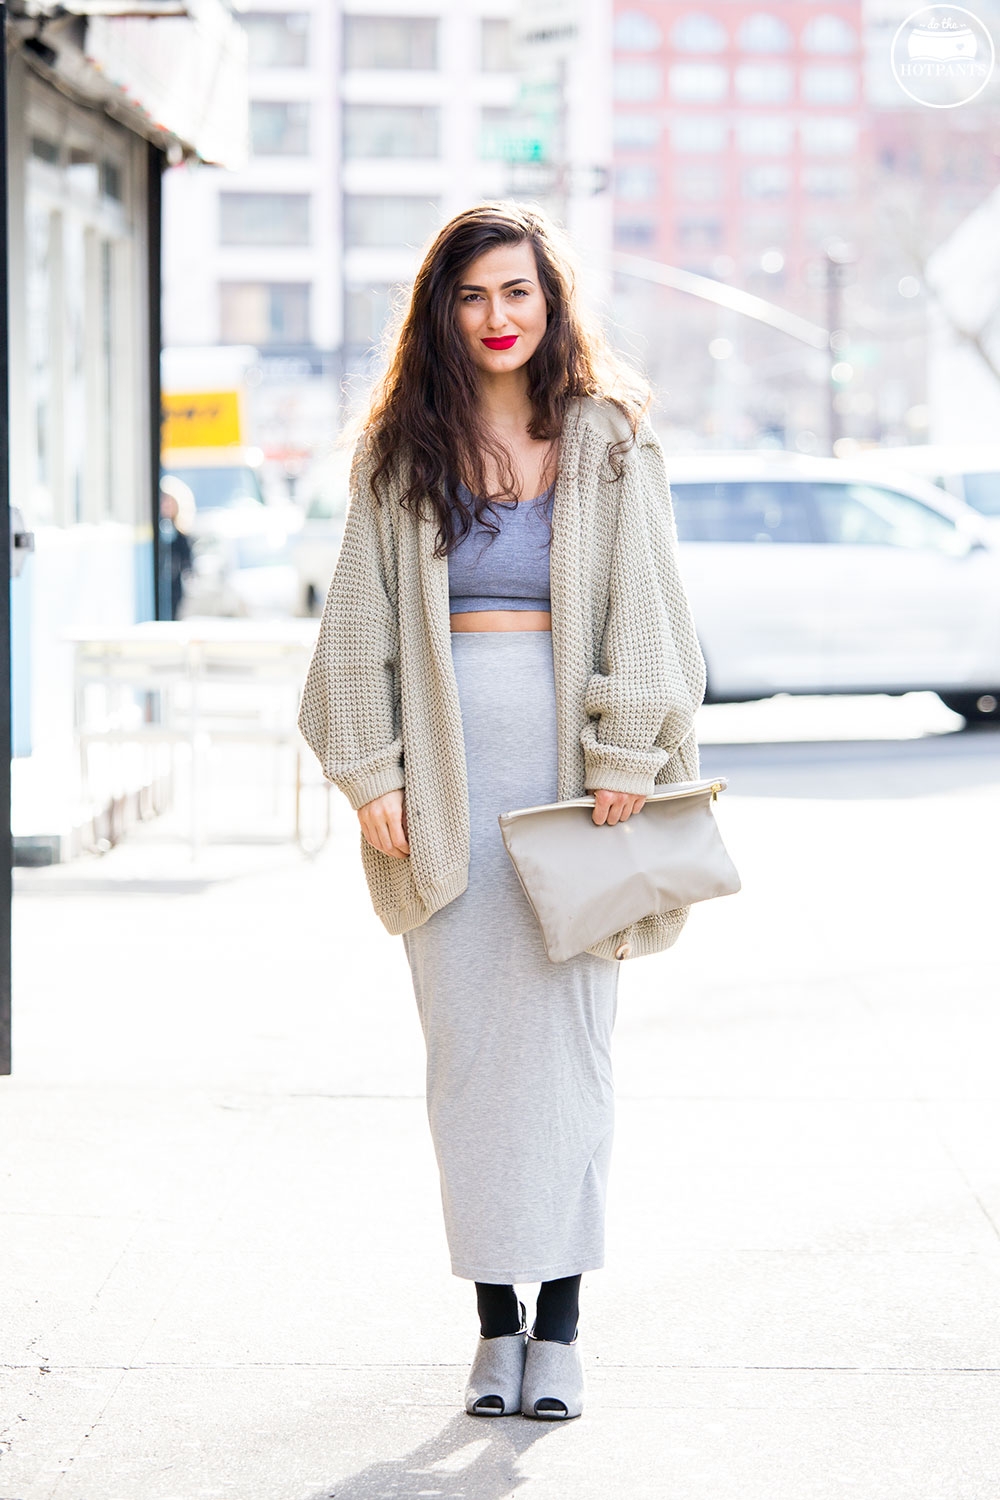 Long Hair Blogger New York City Fashion Winter Style Streetstyle What to wear in the winter